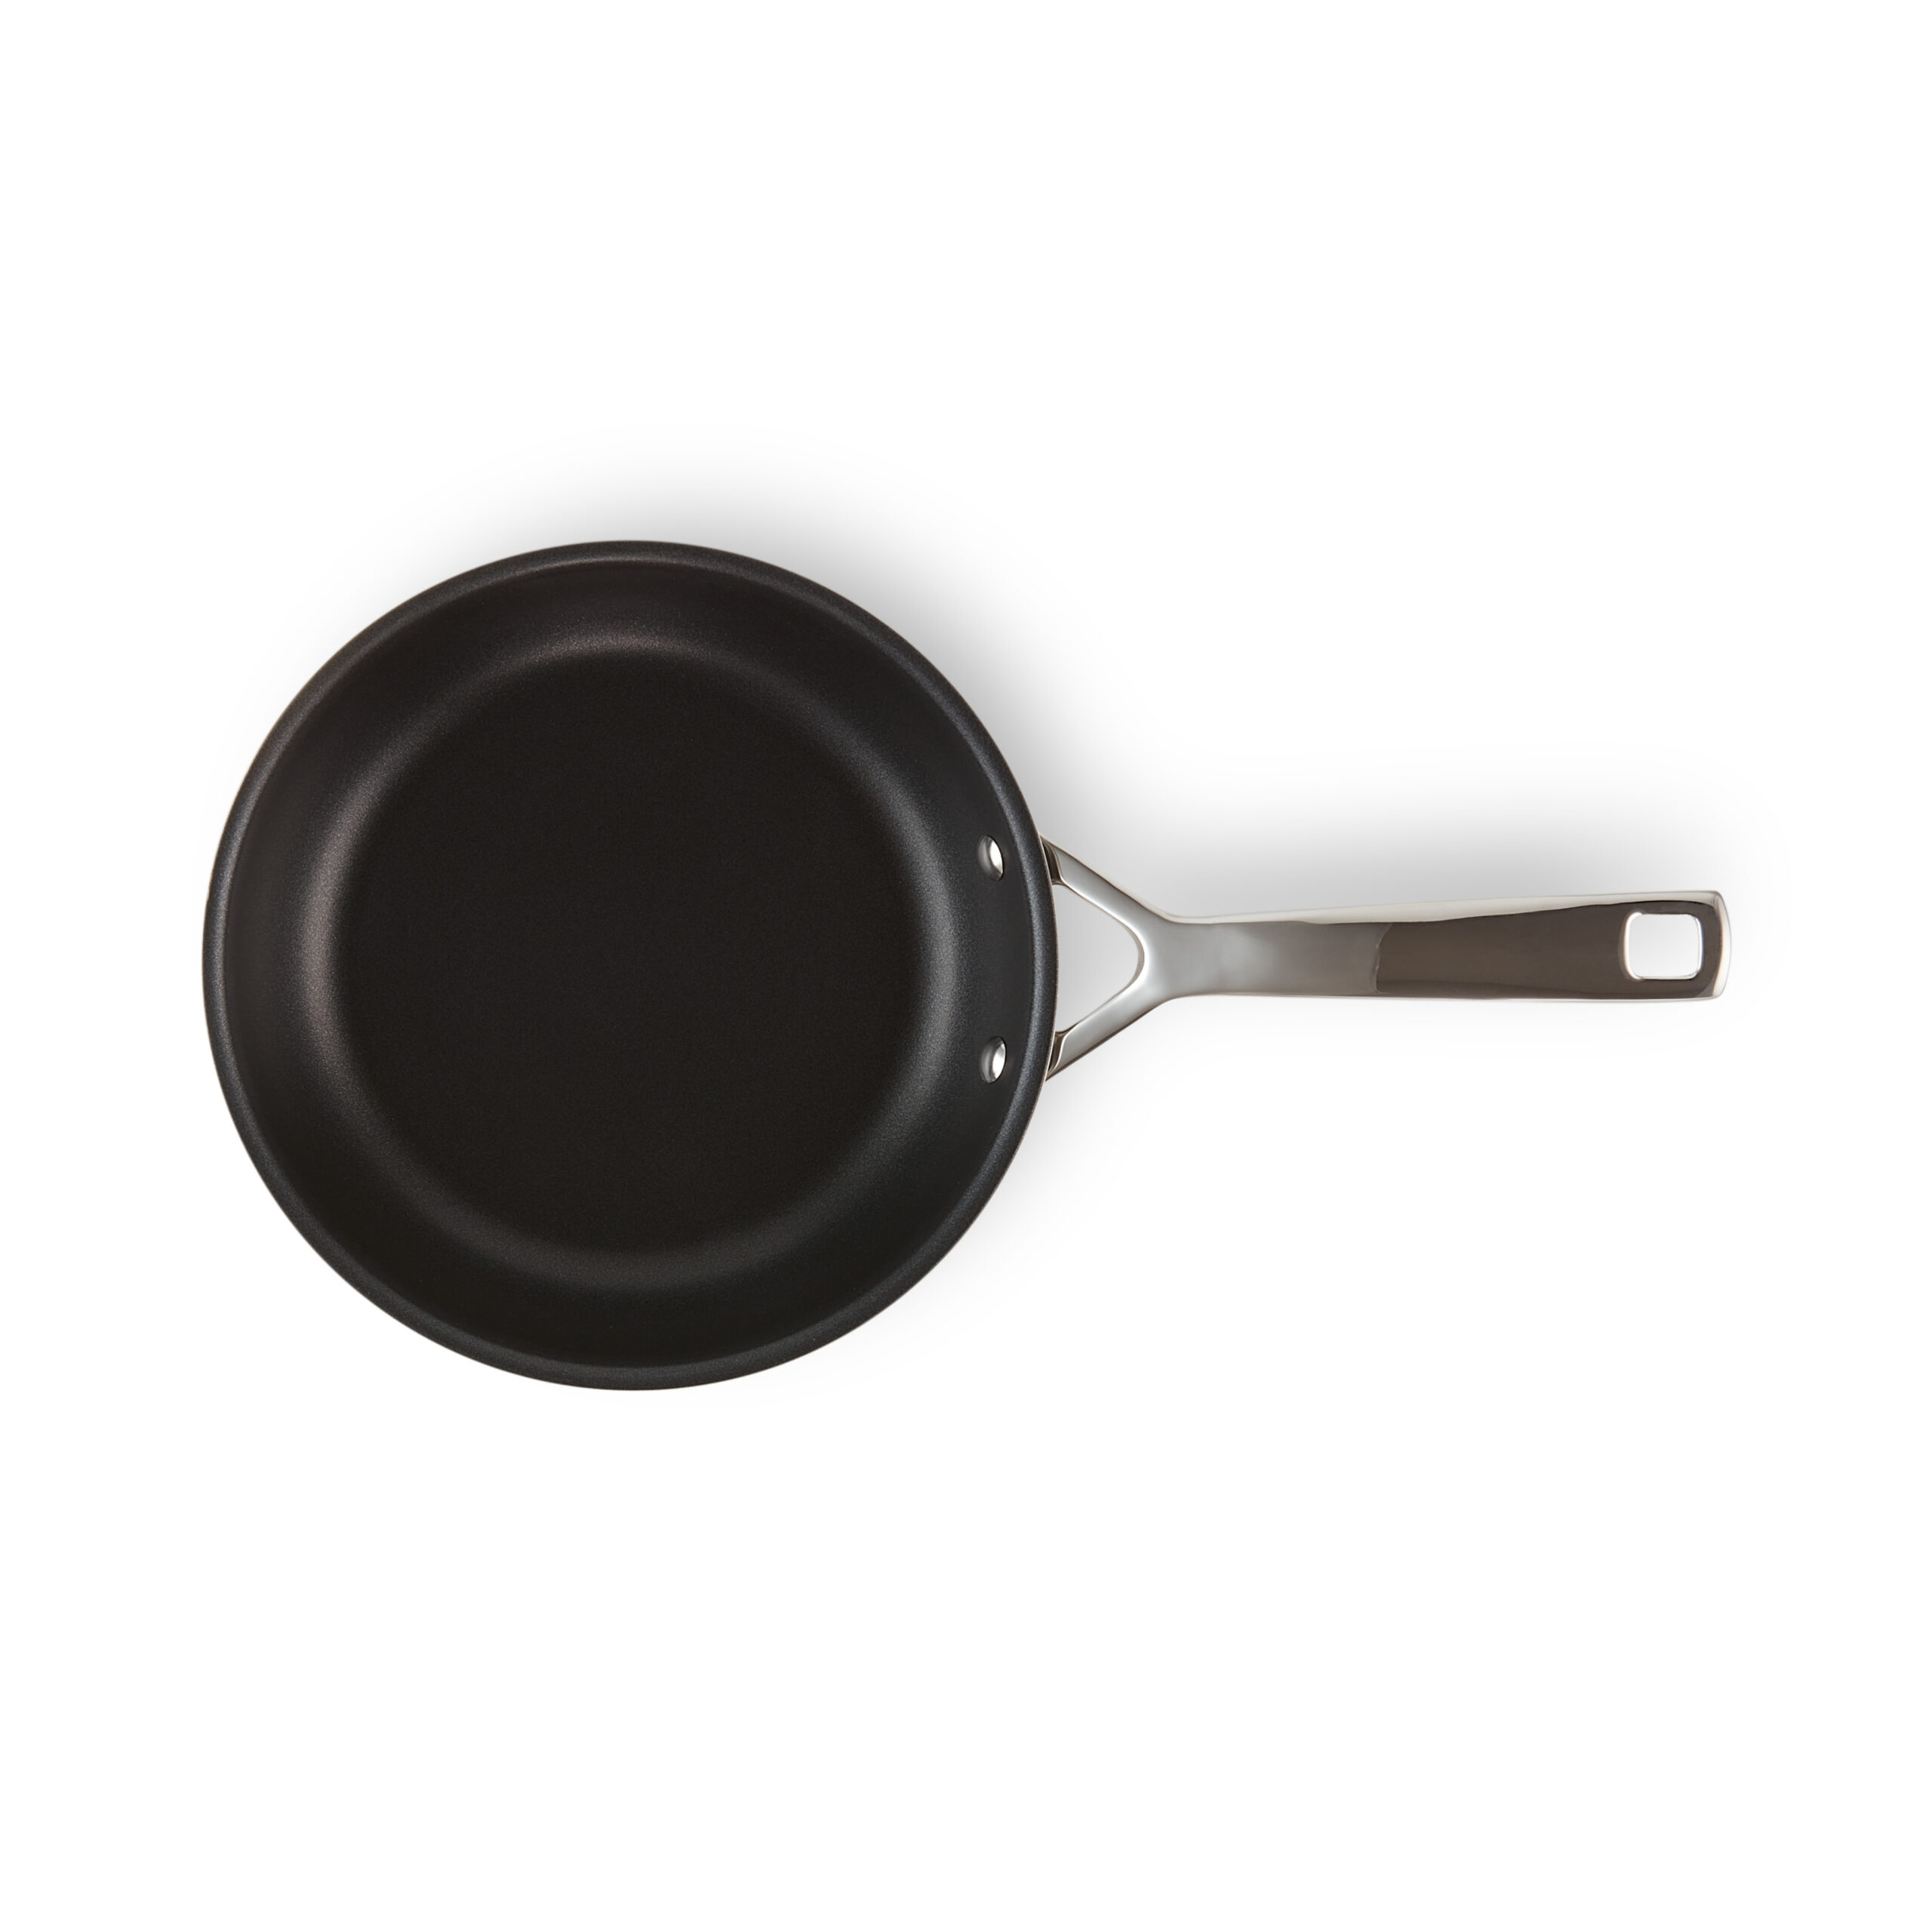 Le Creuset 3-Ply Stainless Steel Non-Stick Omelette Pan - 20cm for Women